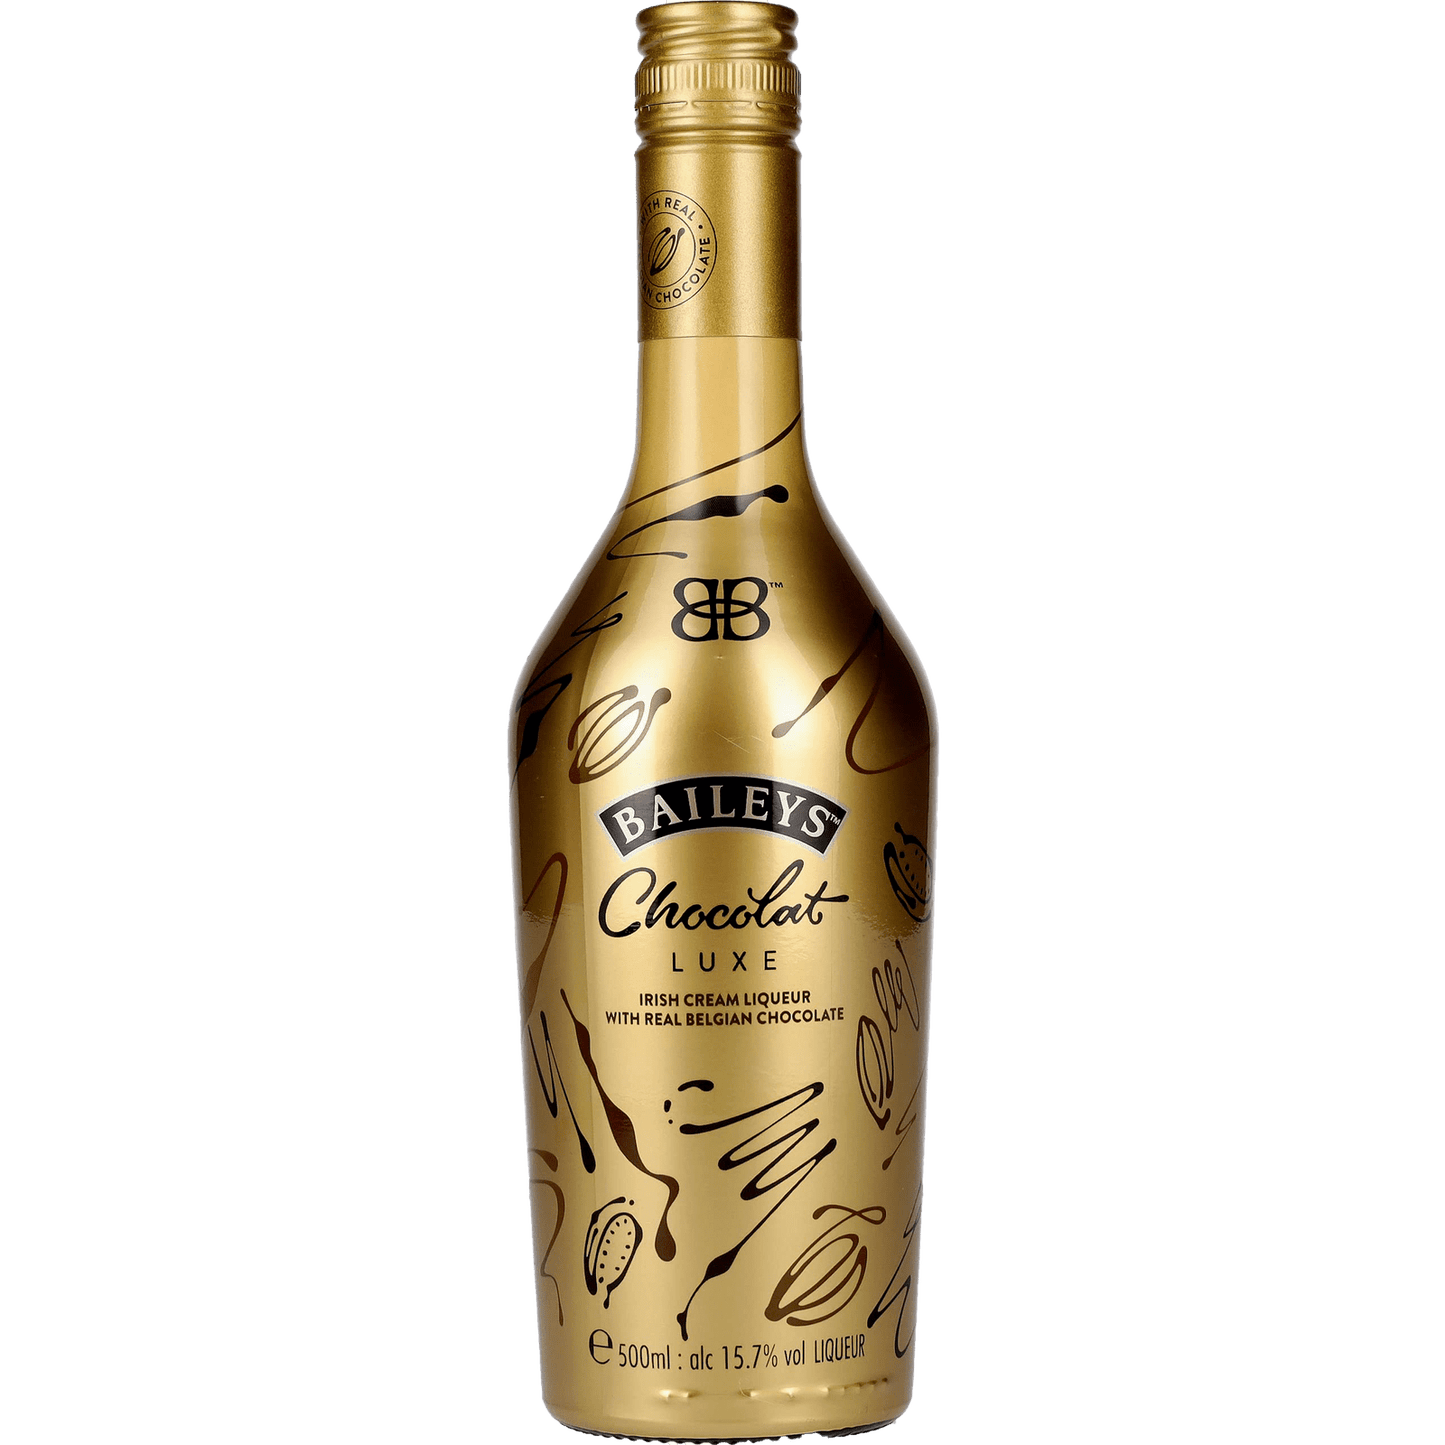 Baileys Chocolate Luxe 50cl - The General Wine Company